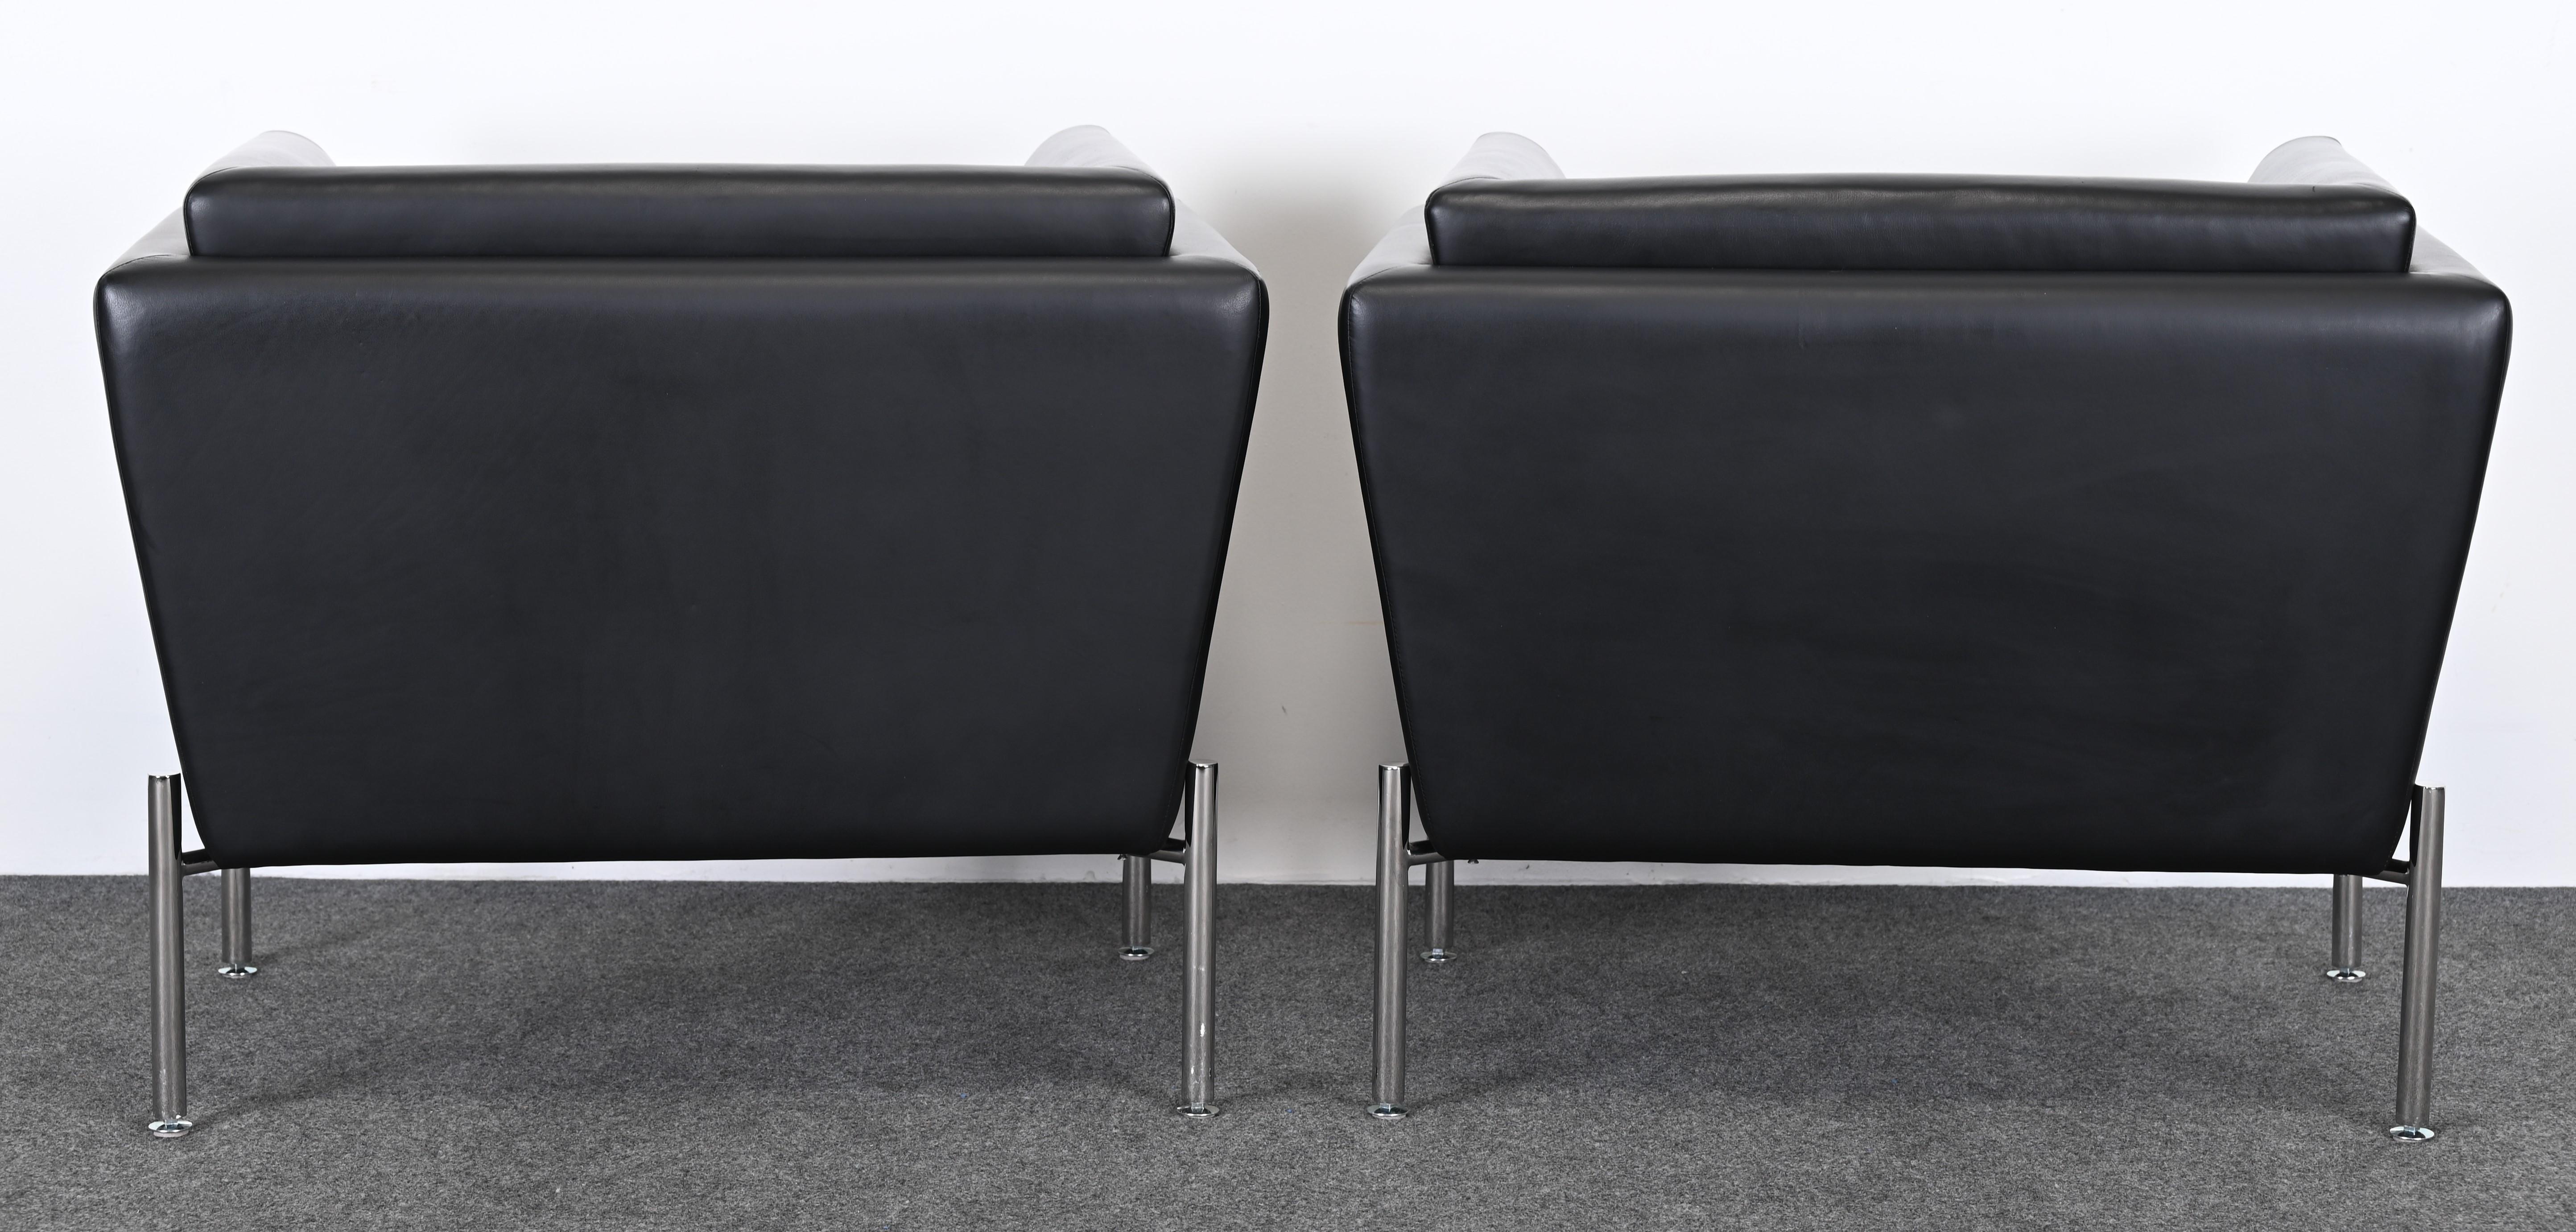 Pair of Leather and Stainless Steel Lounge Chairs by Brueton, 20th Century For Sale 9